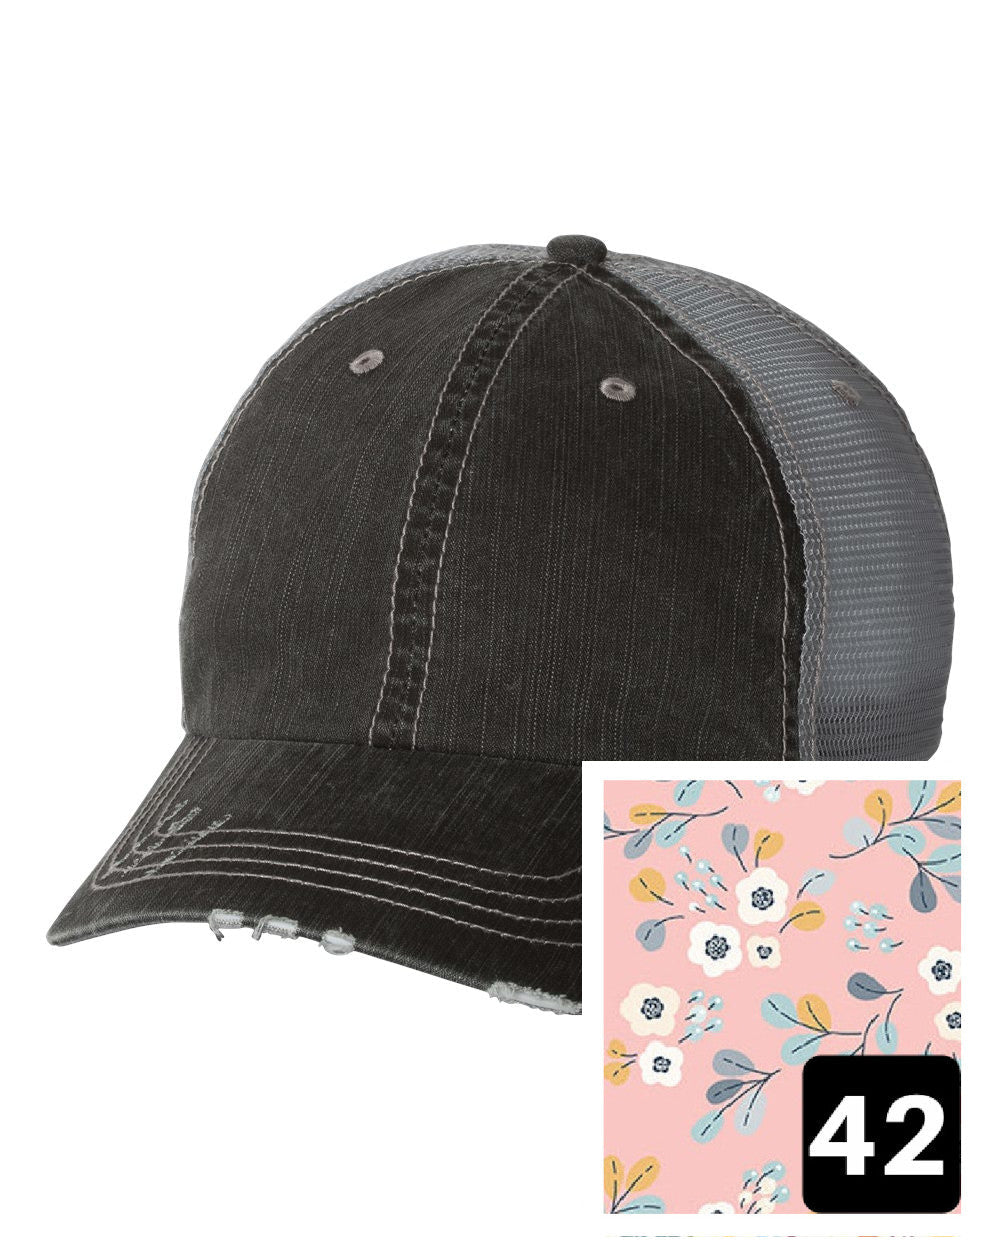 gray distressed trucker hat with light blue and pink mosaic fabric state of Kentucky